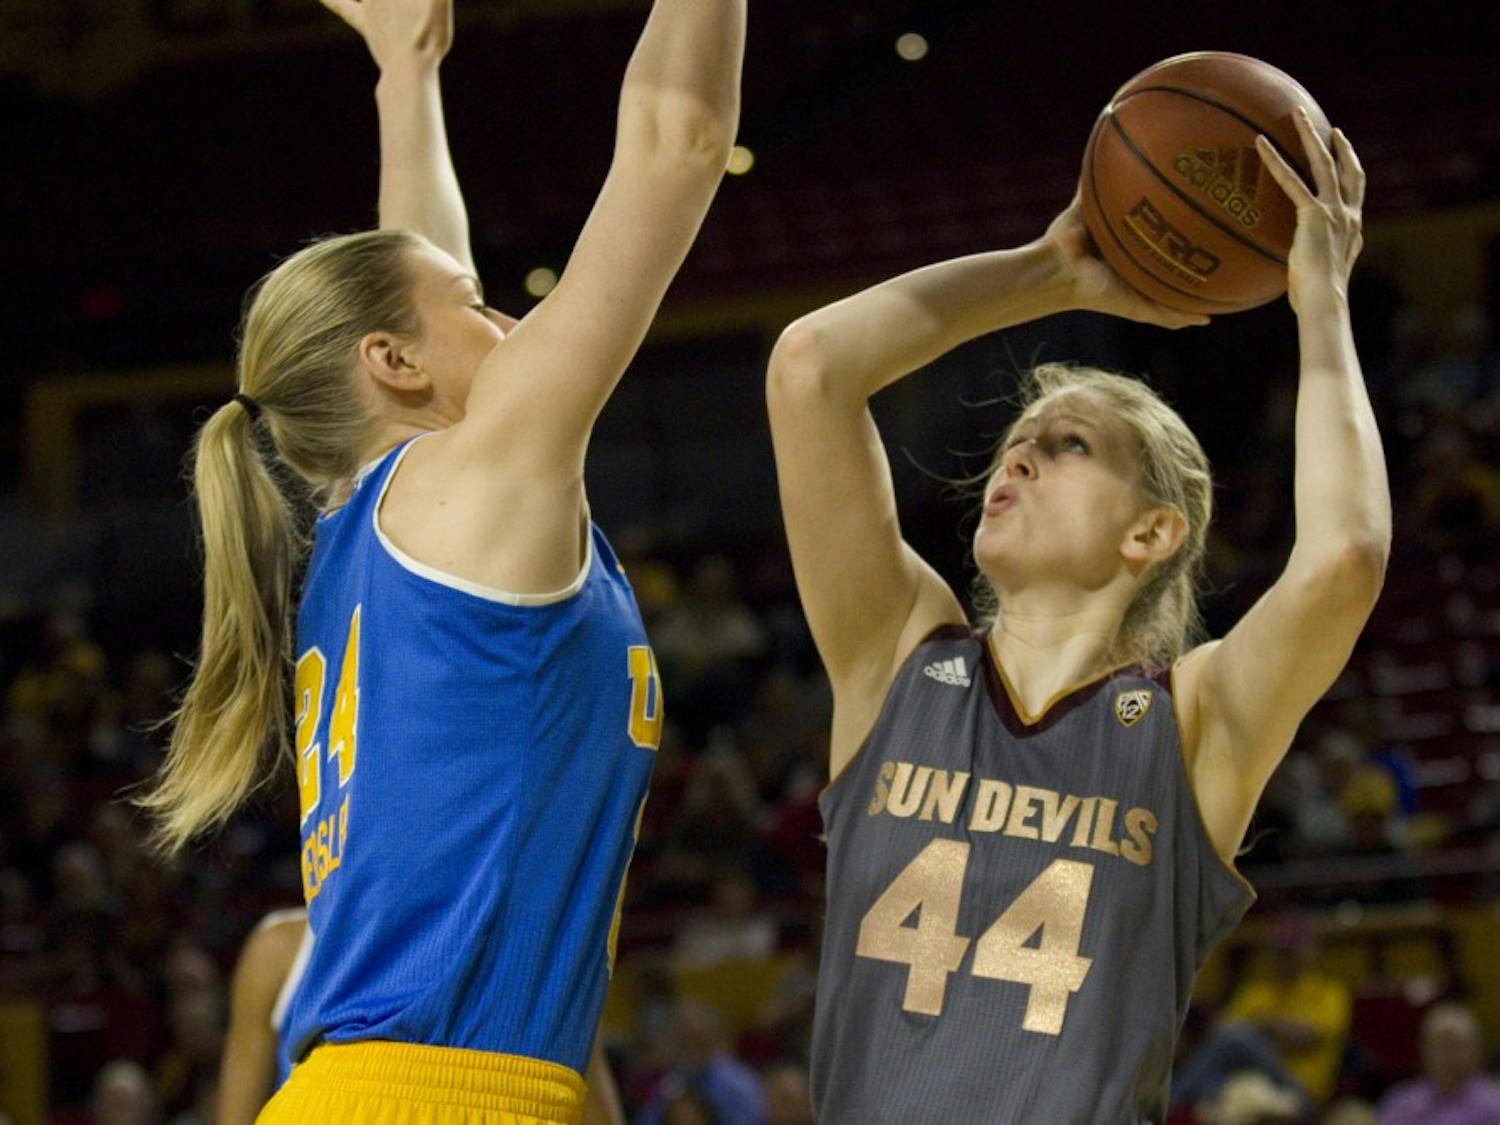 ASU senior center Sara Hattis (44) puts up a shot during a women's basketball game against the no. 15 ranked UCLA Bruins in Wells Fargo Arena in Tempe, Arizona on Sunday, Feb. 26, 2017. ASU lost 55-52.  (Josh Orcutt/State Press)